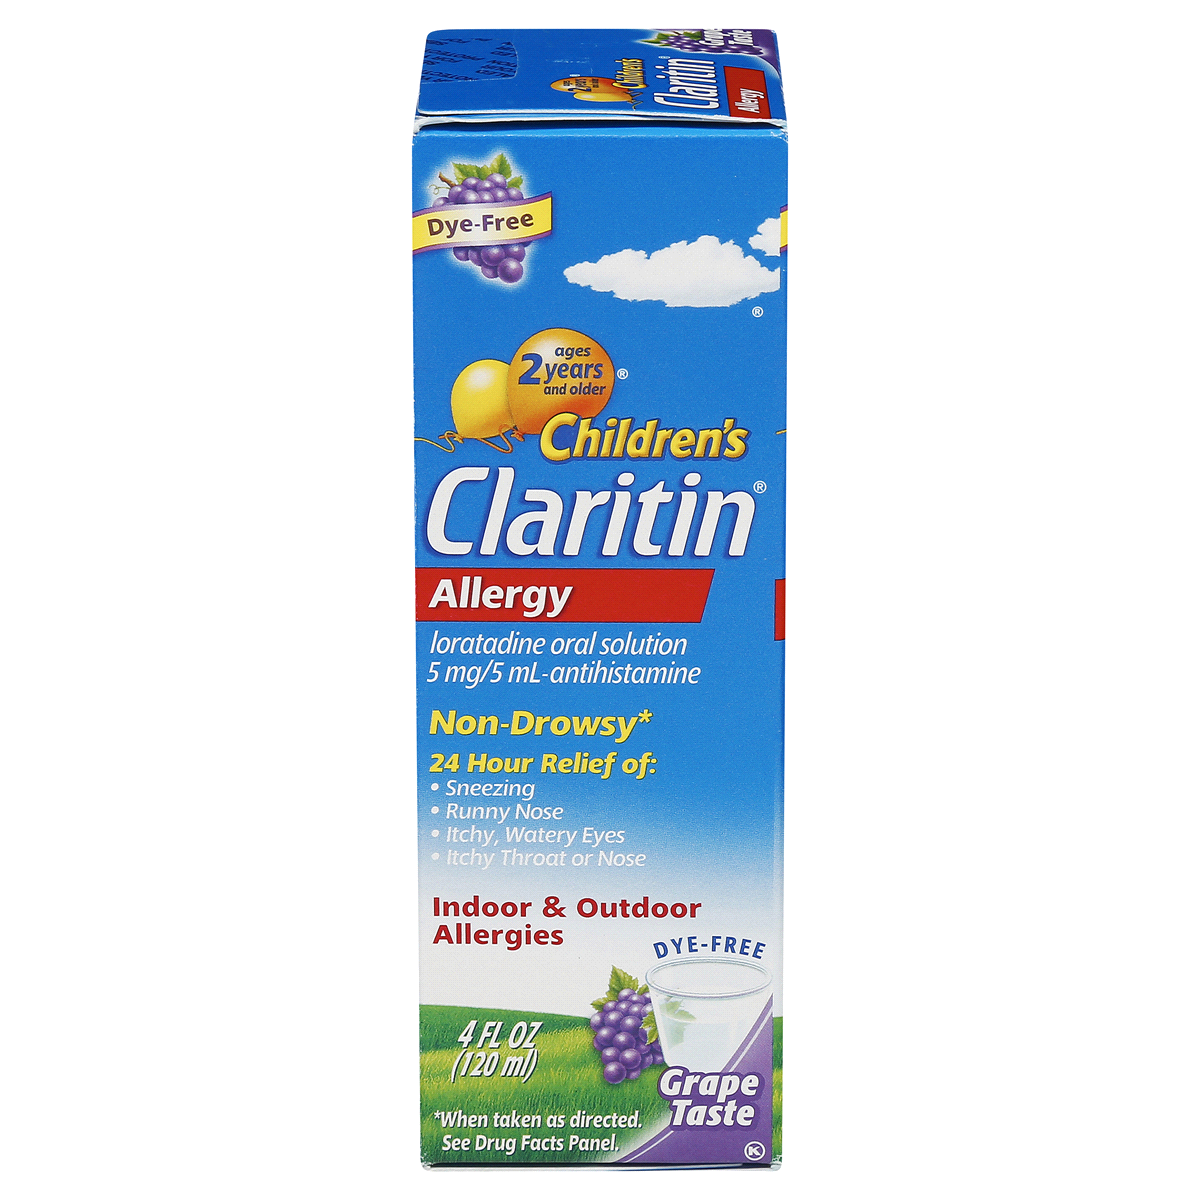 slide 44 of 91, Claritin Childrens Allergy Grape-flavored Syrup, 4 oz